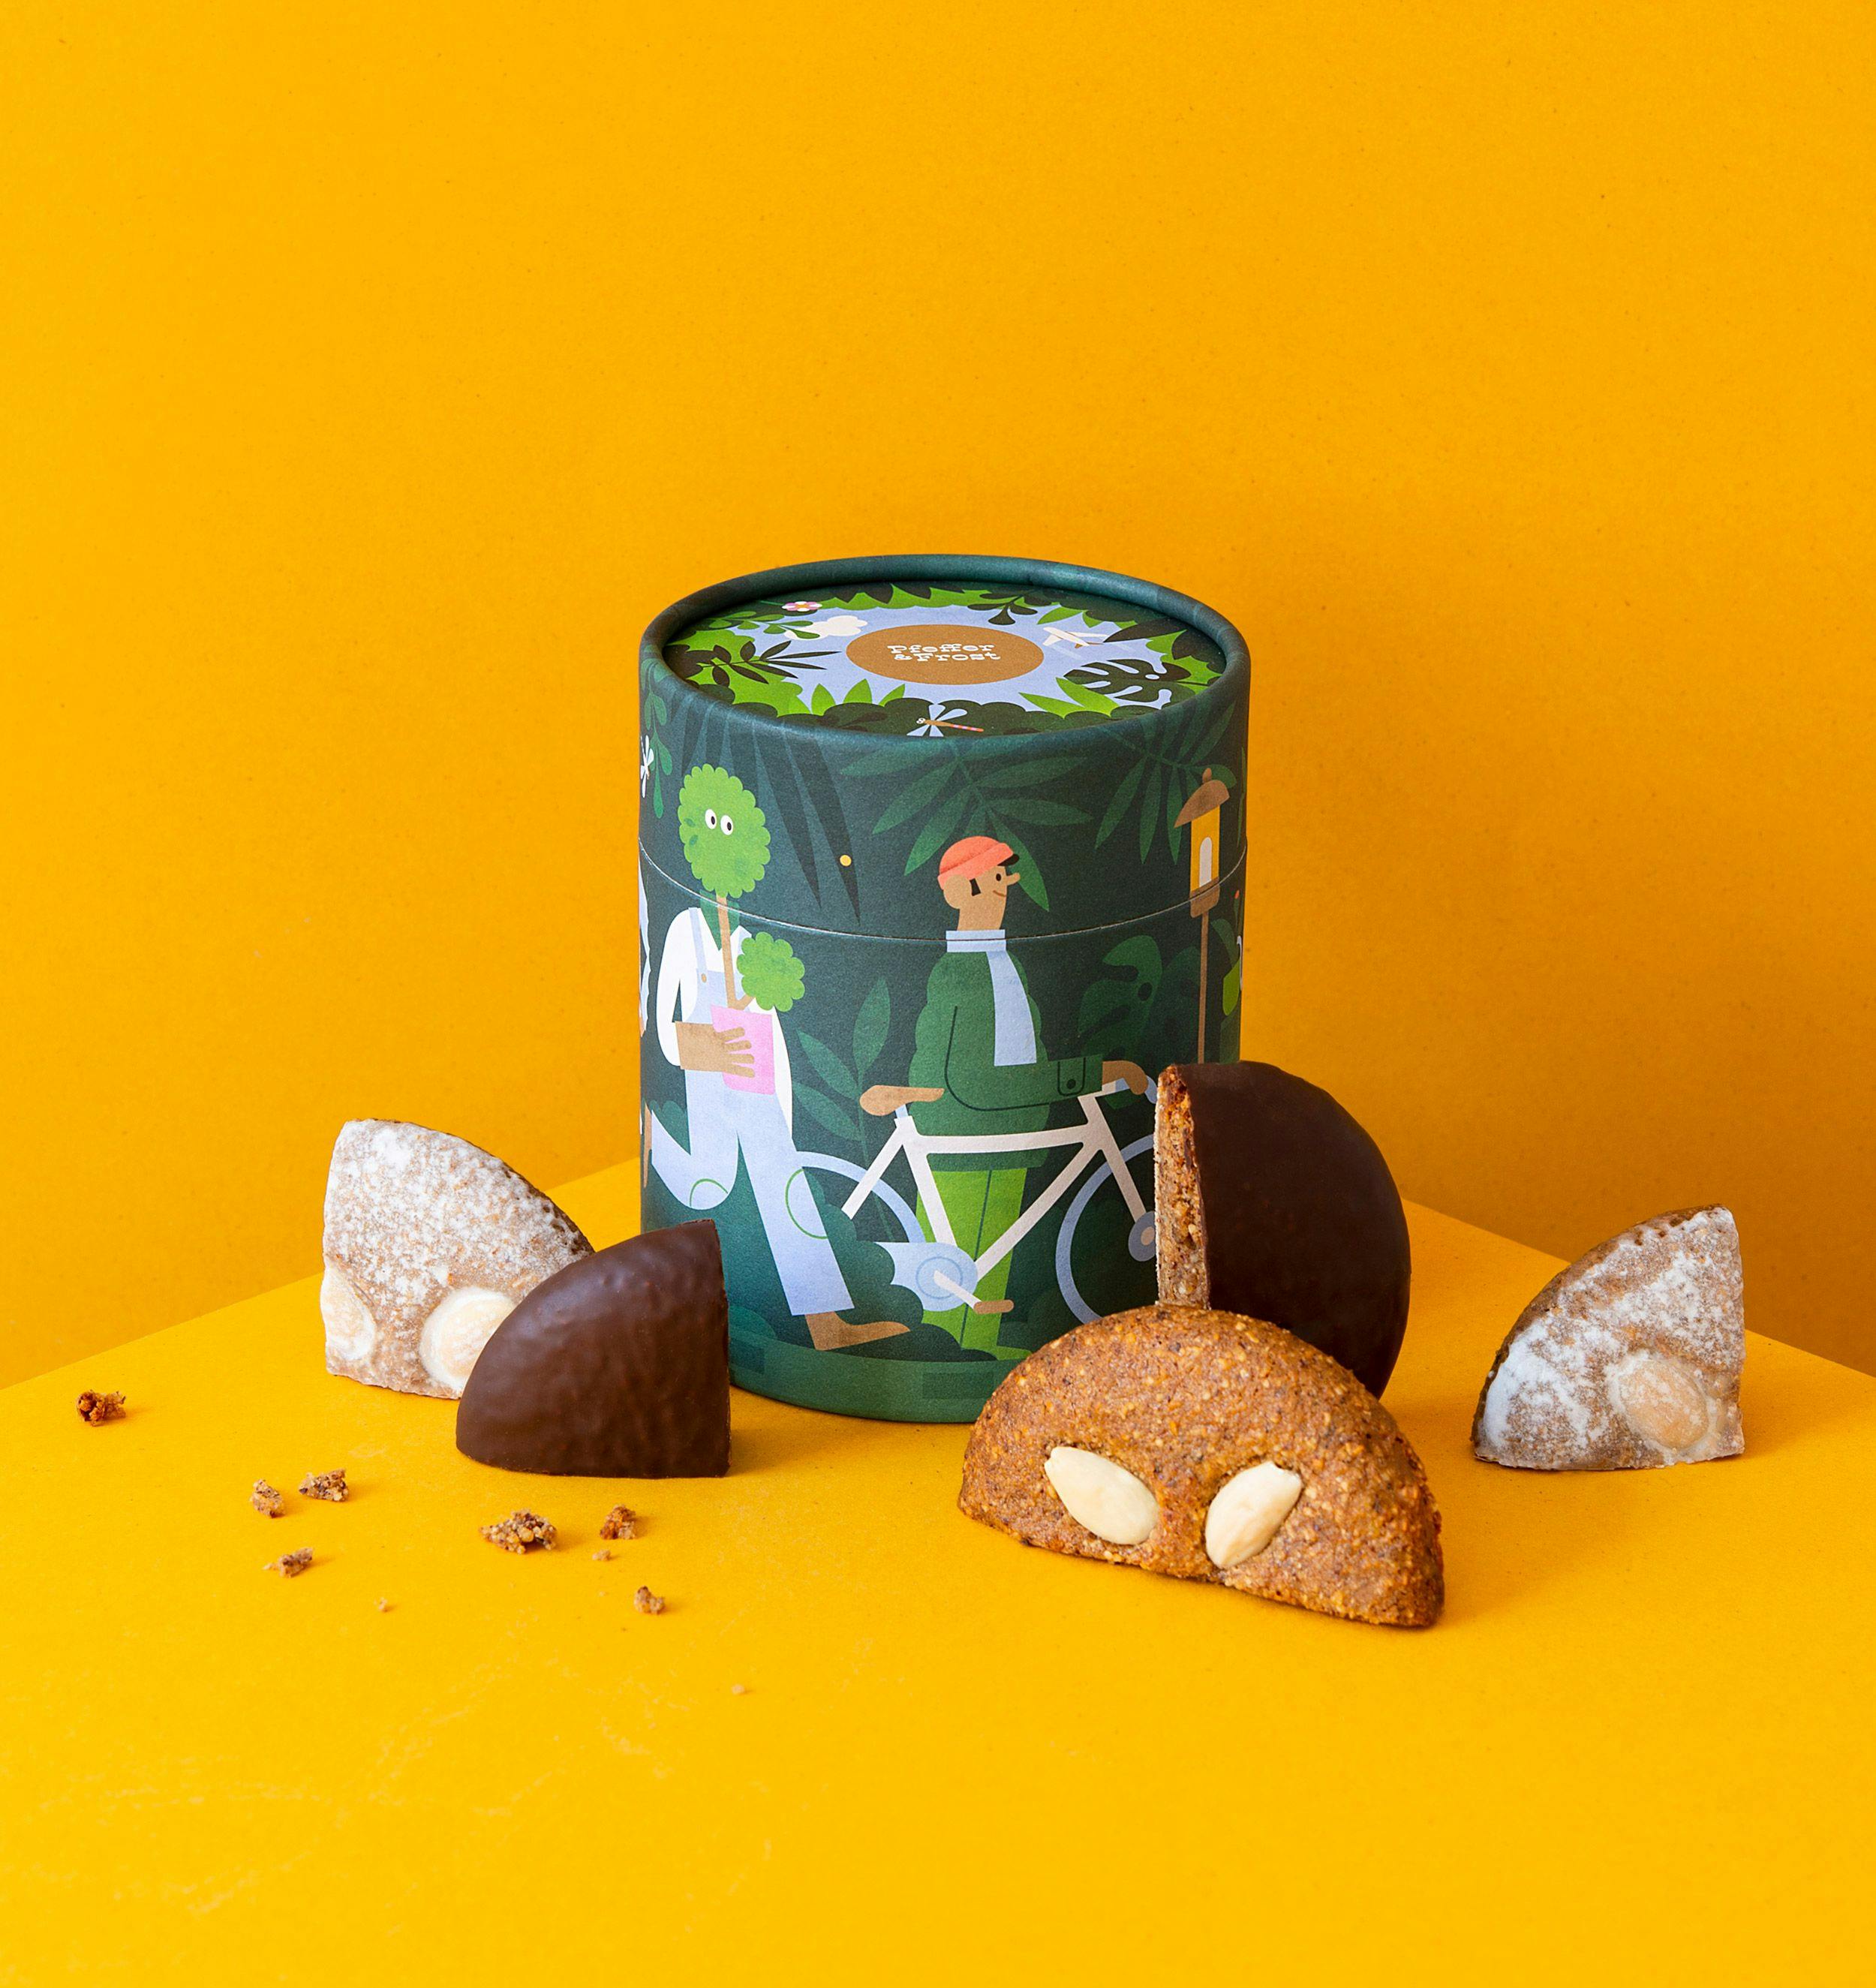 Gingerbread tins - illustrated and made of paper. A sustainable collectible.